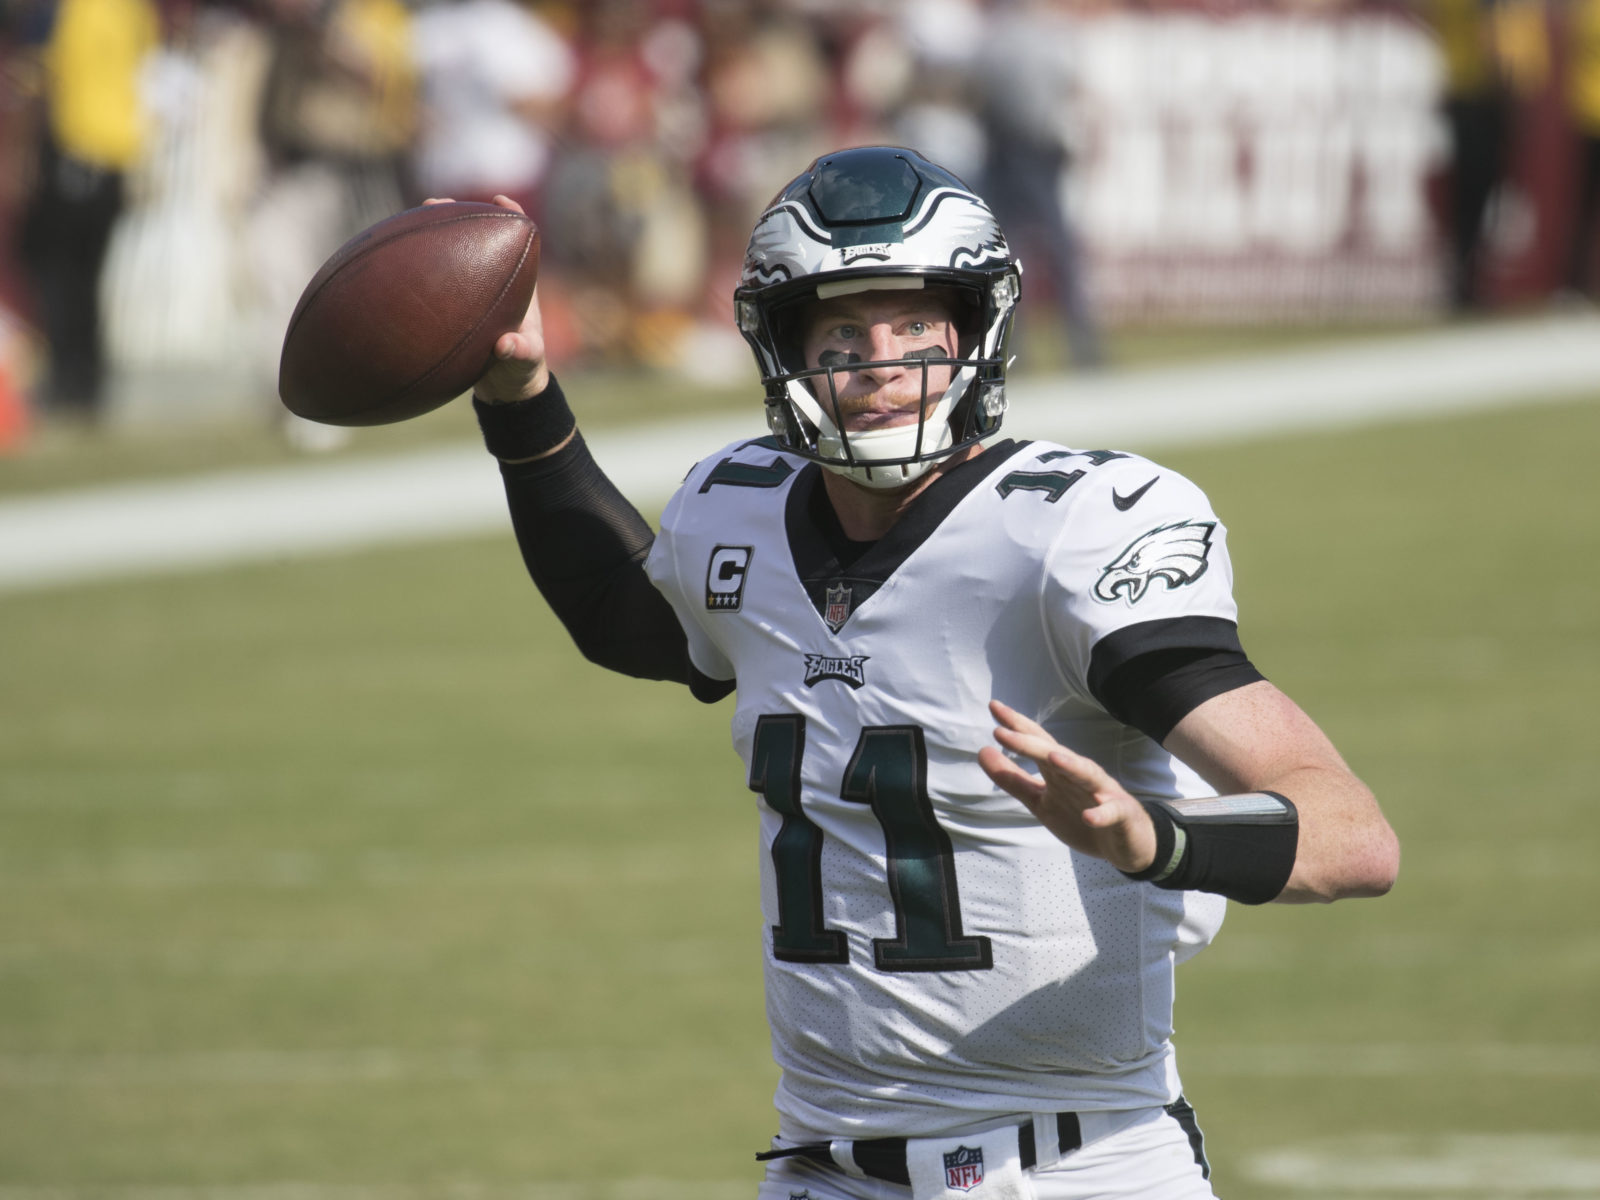 Philadelphia's Carson Wentz is another candidate for the NFL MVP award